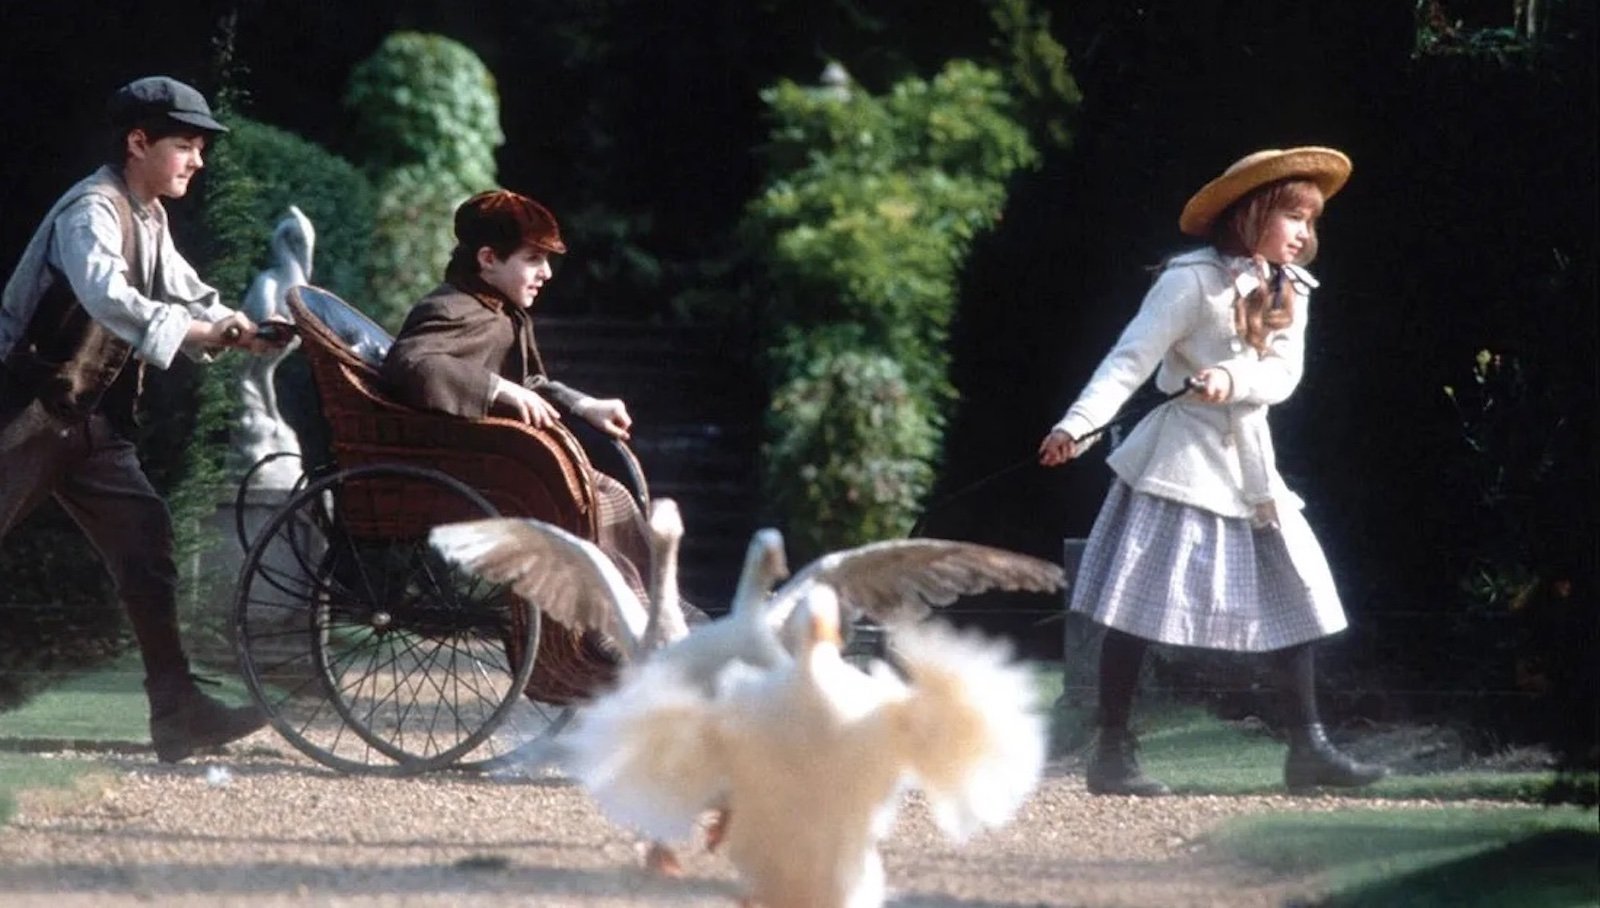 In an old English garden setting, a boy in a cap pushes a wheelchair with a boy in an cap sitting in it, as the whole chair is pulled along in front by a girl in a straw hat. In the foreground are geese flapping their wings.